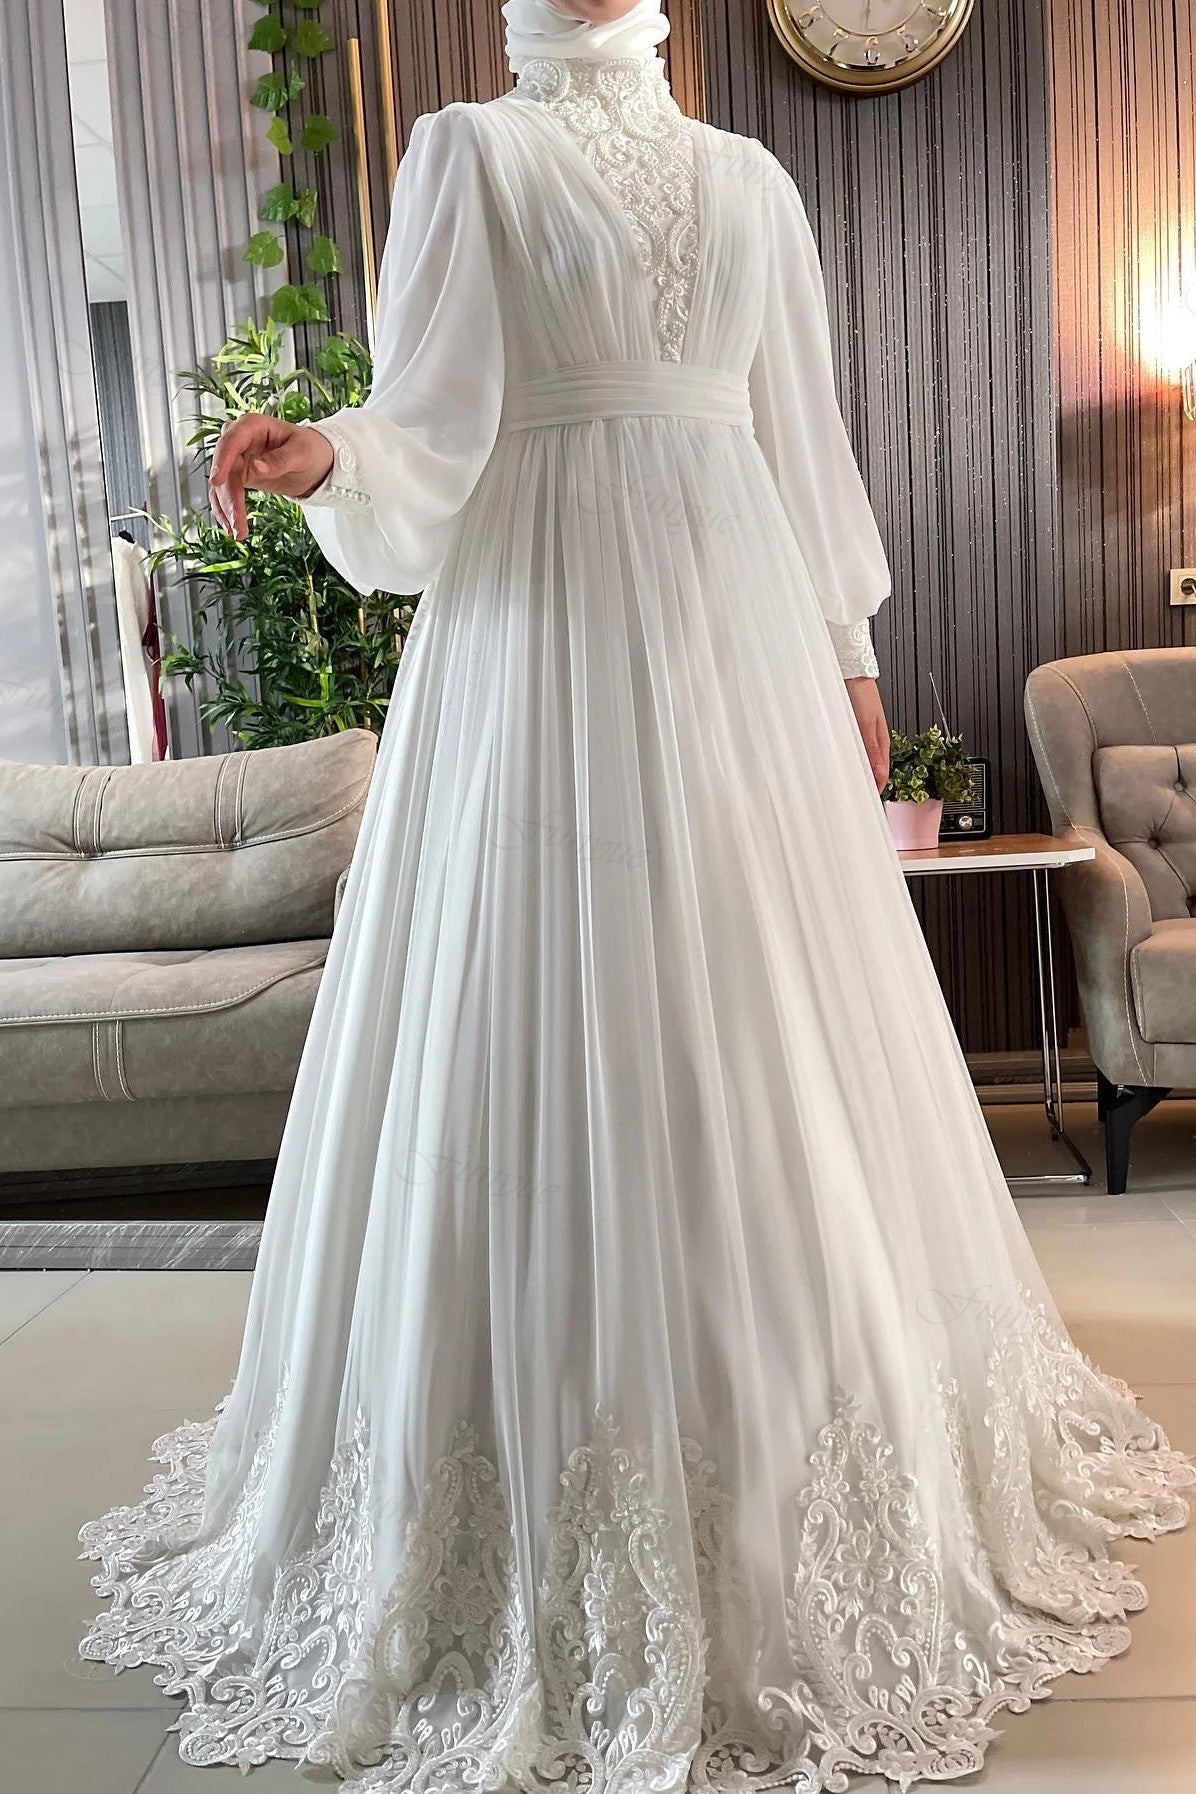 Hijab Wedding Dress with long sleeves by Brides and Tailor